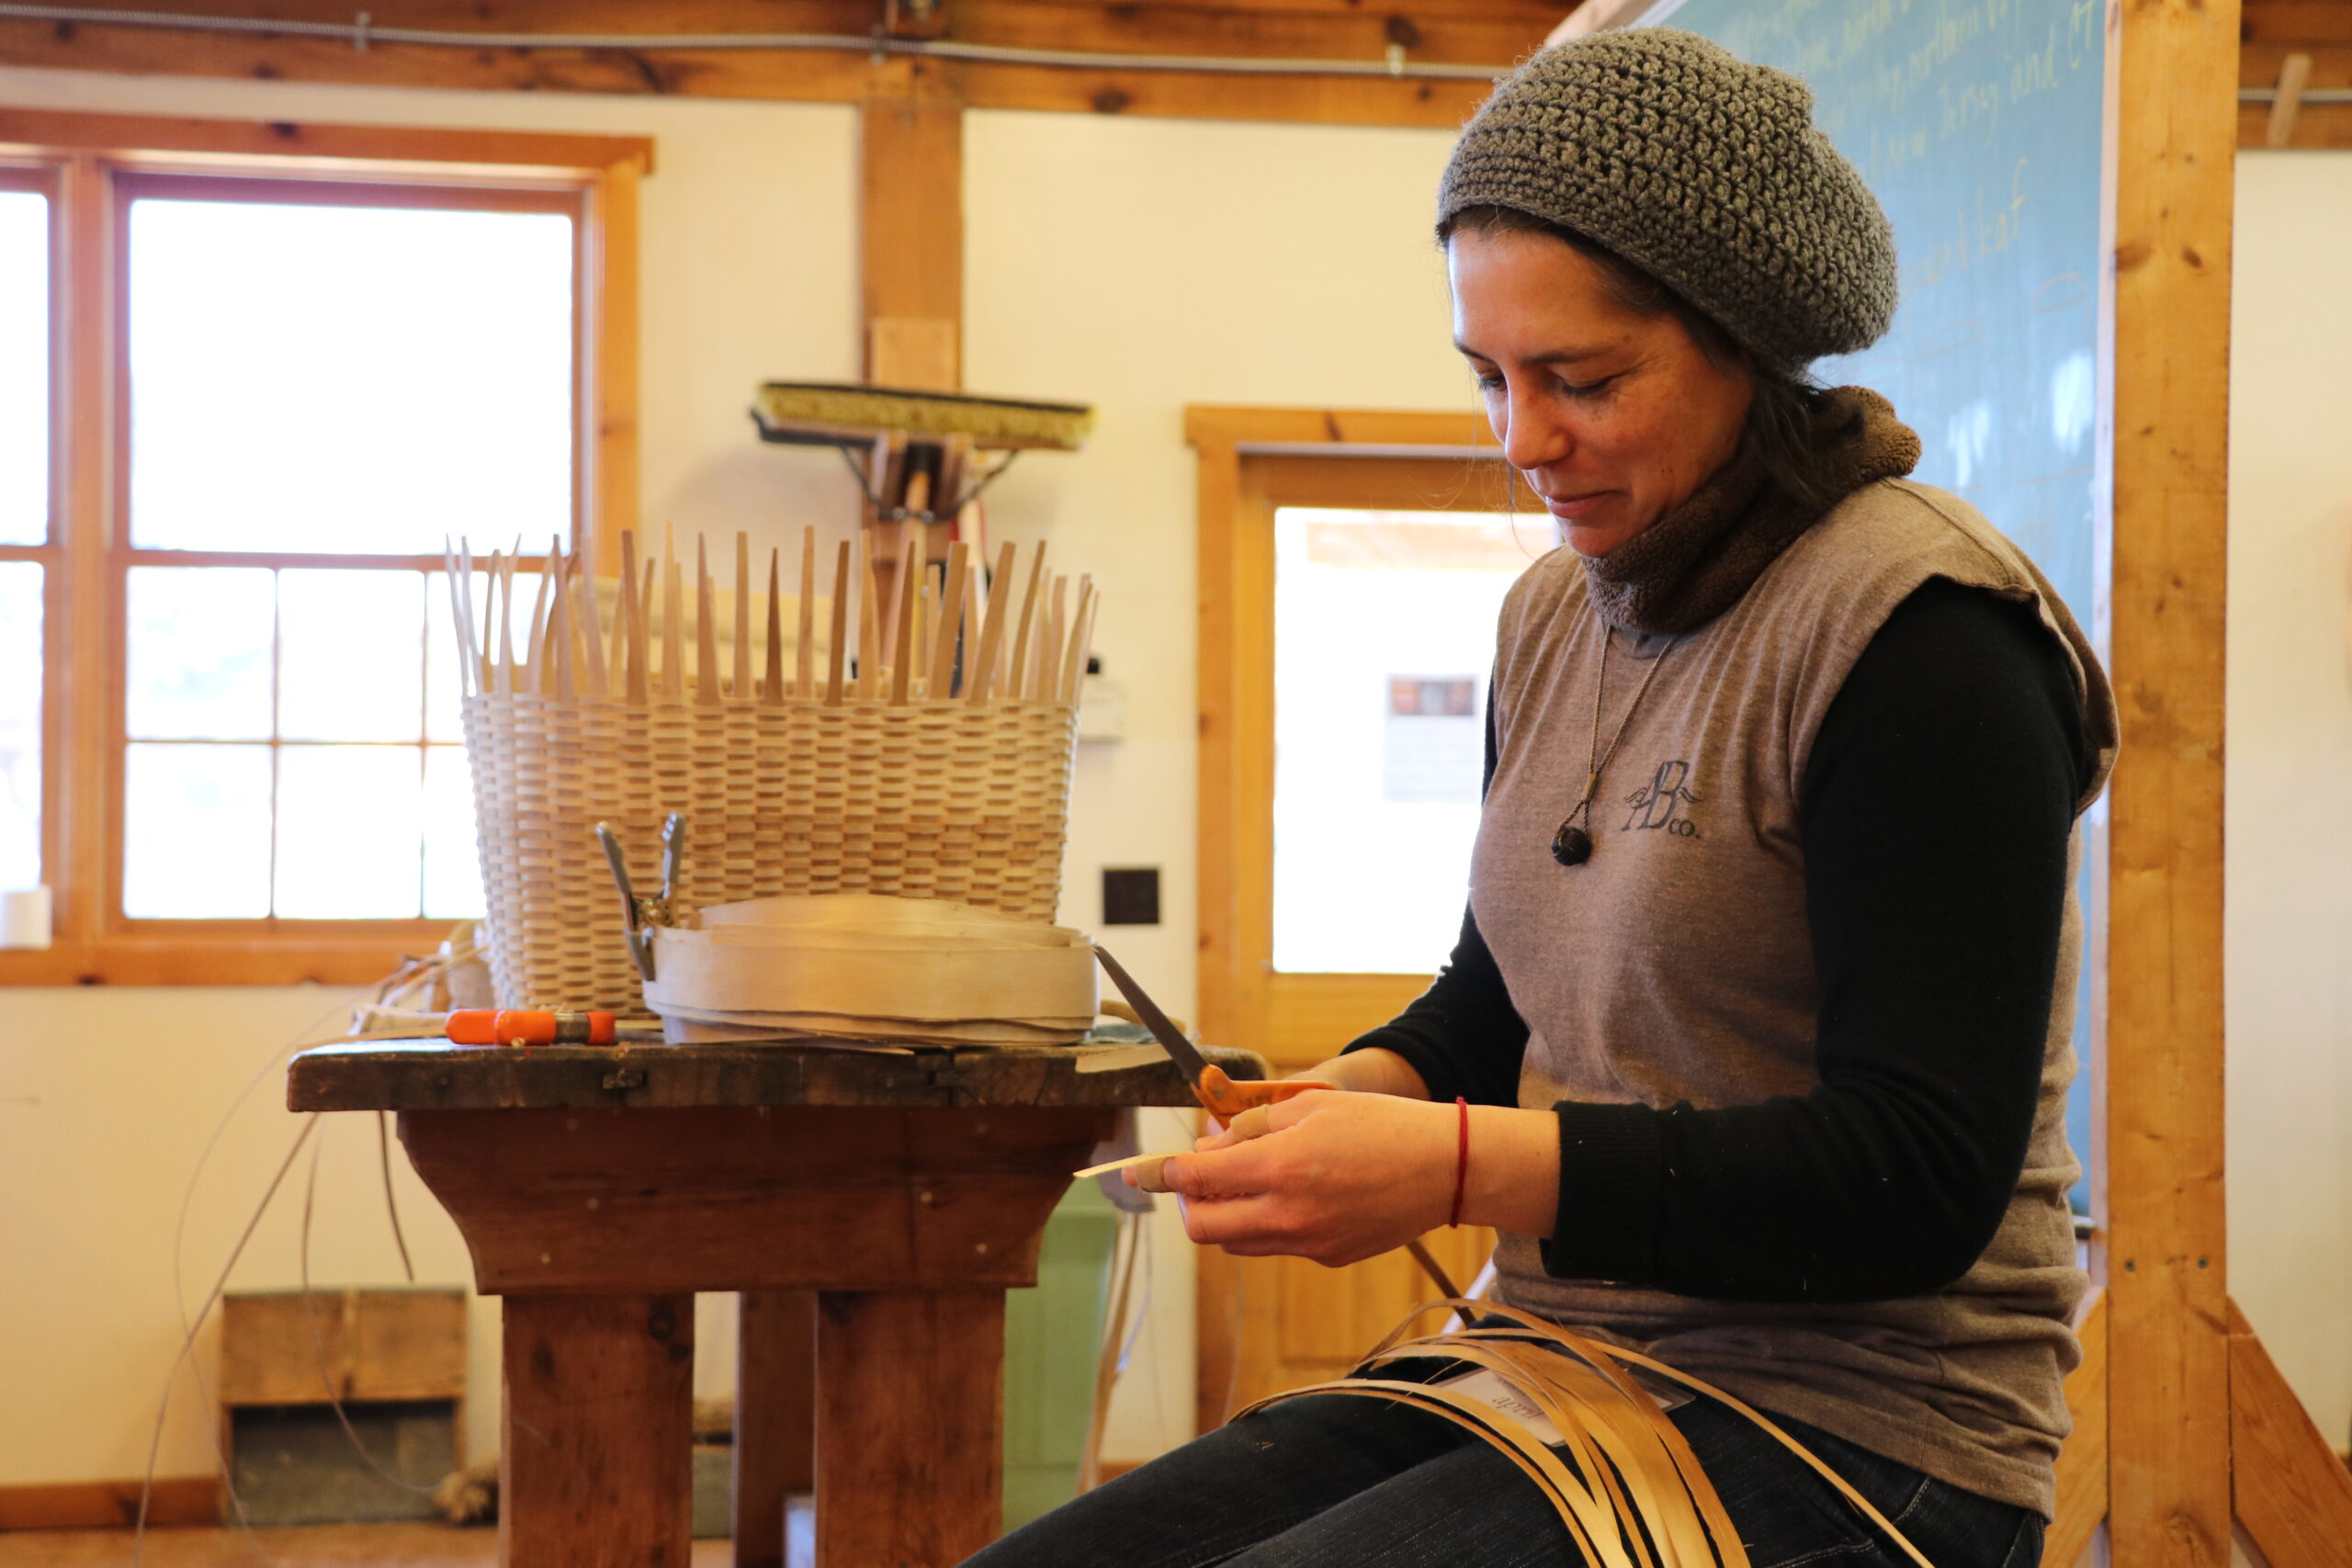 Person wearing knit hat and scarf cuts strip of wood with scissors, with in-progress basket on table in front of them.